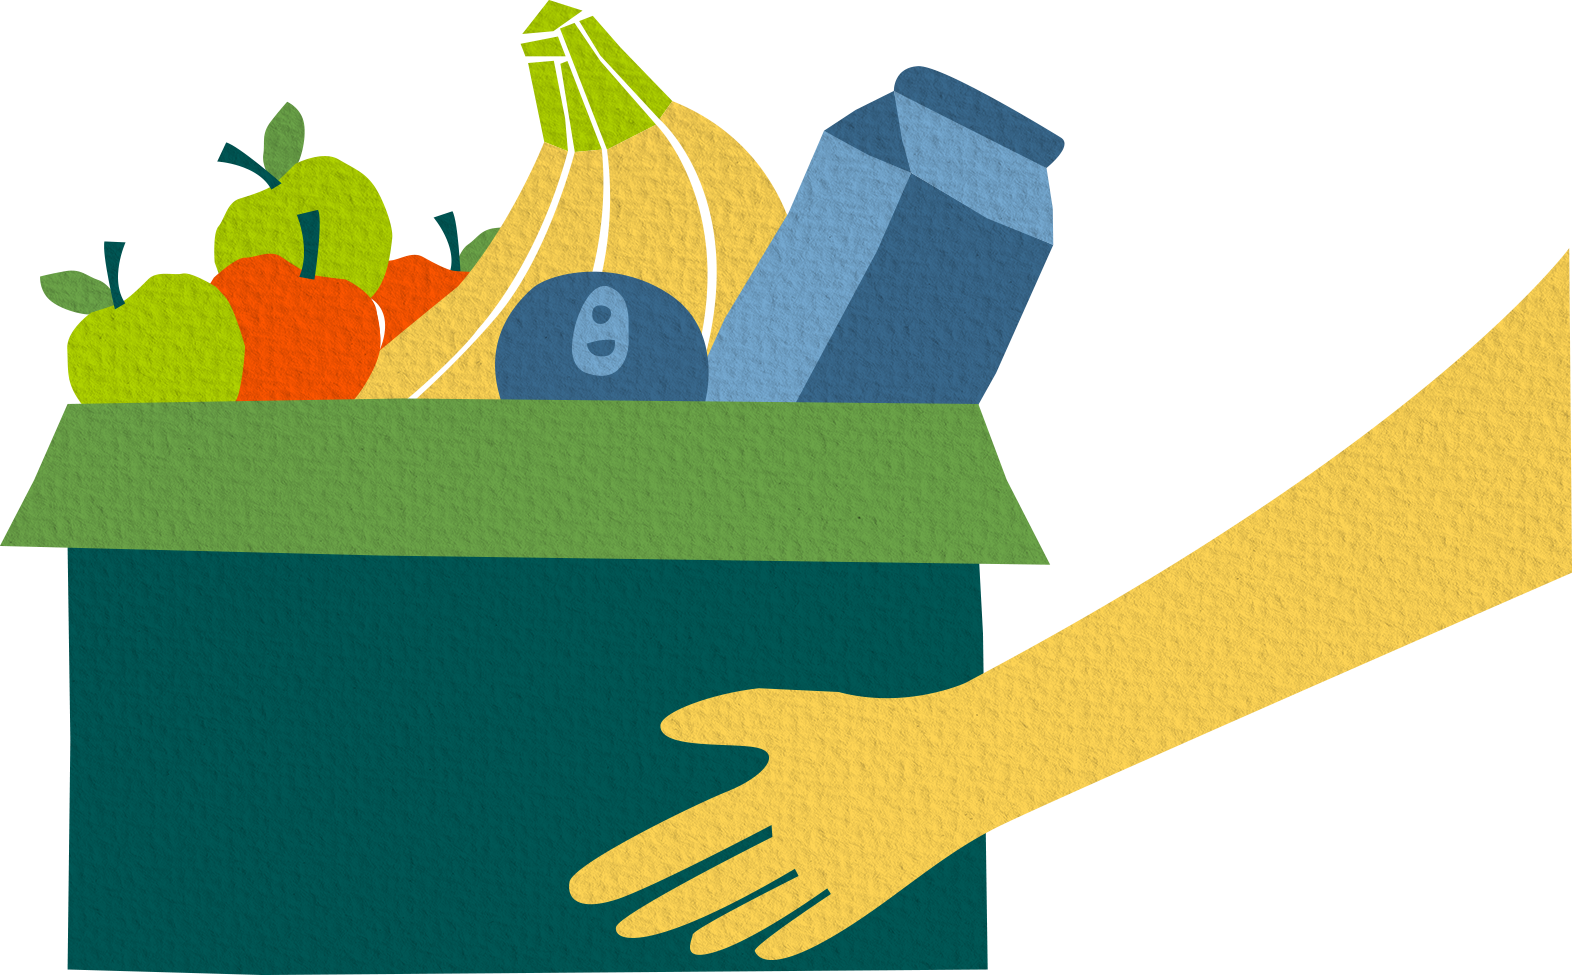 Hands holding a box full of food for donation, including apples, bananas and canned goods